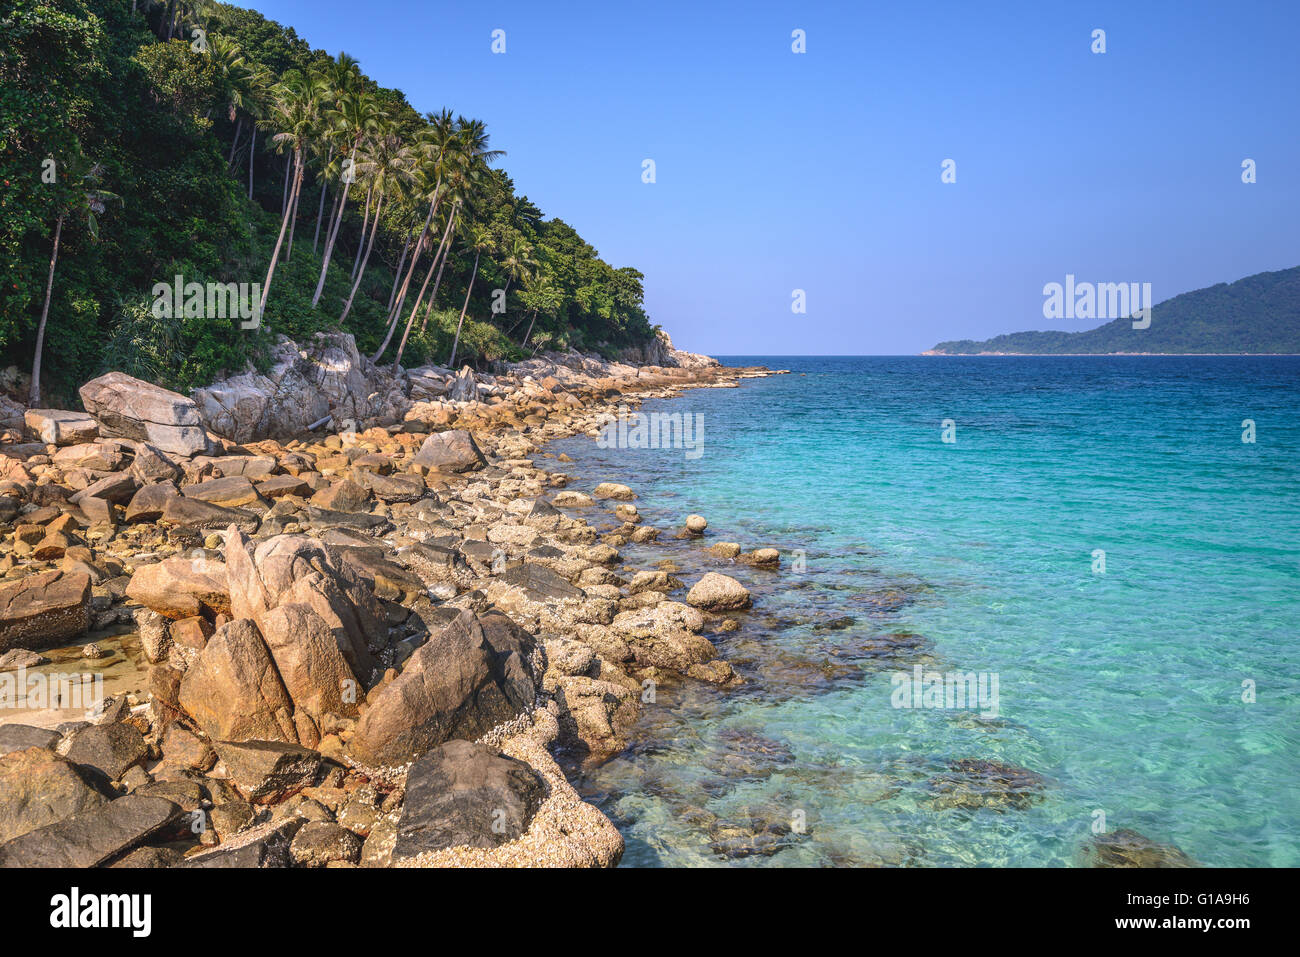 The Perhentian islands in Malaysia Stock Photo